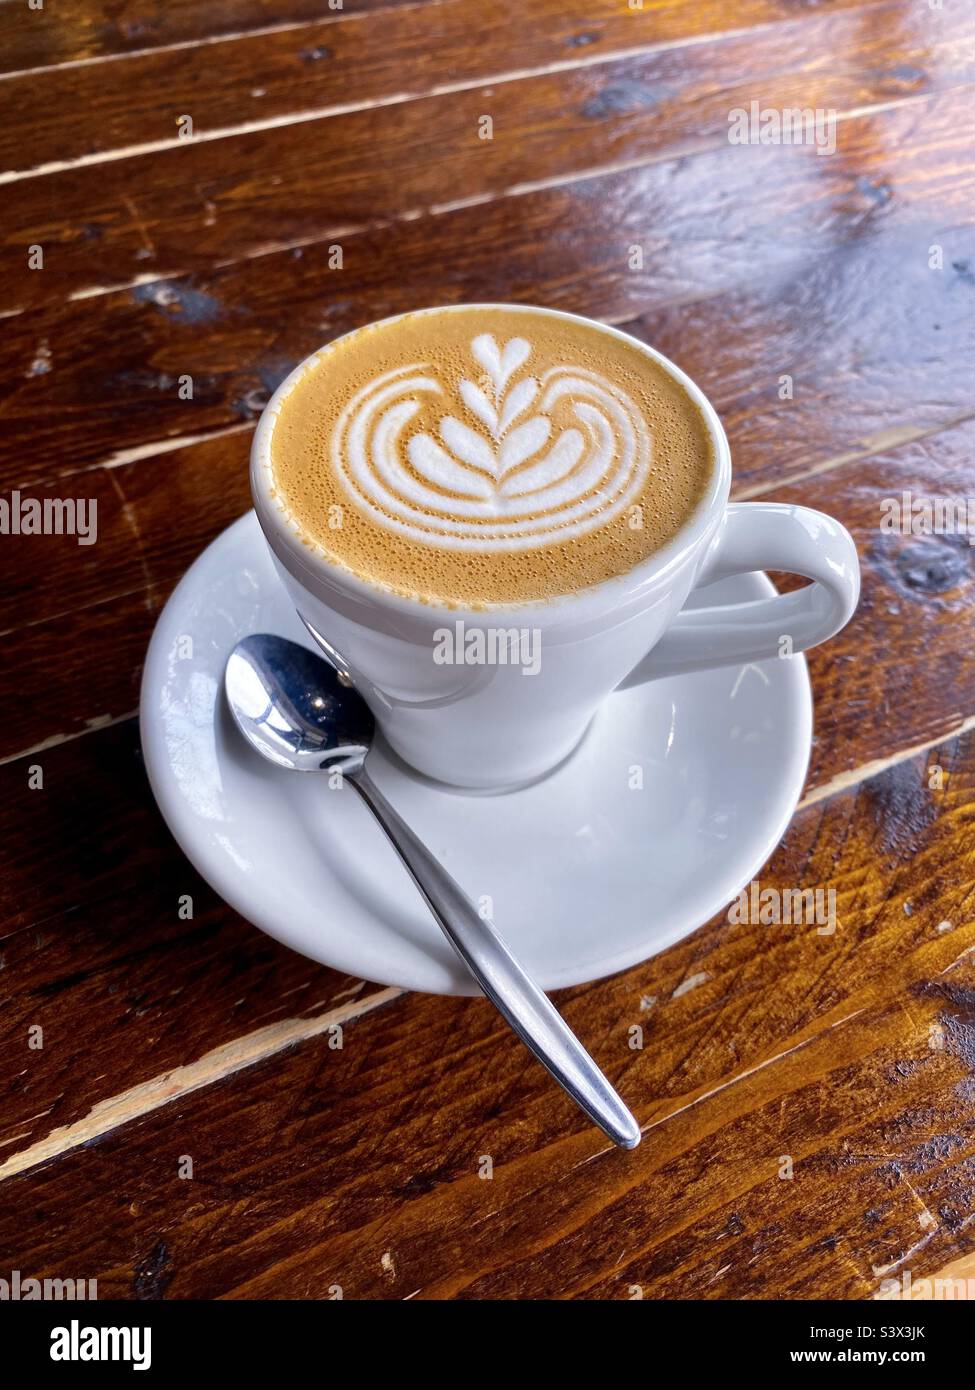 White cup of hot flat white coffee with decorative frothy swirl hearts, sitting on a rustic wooden table. Stock Photo